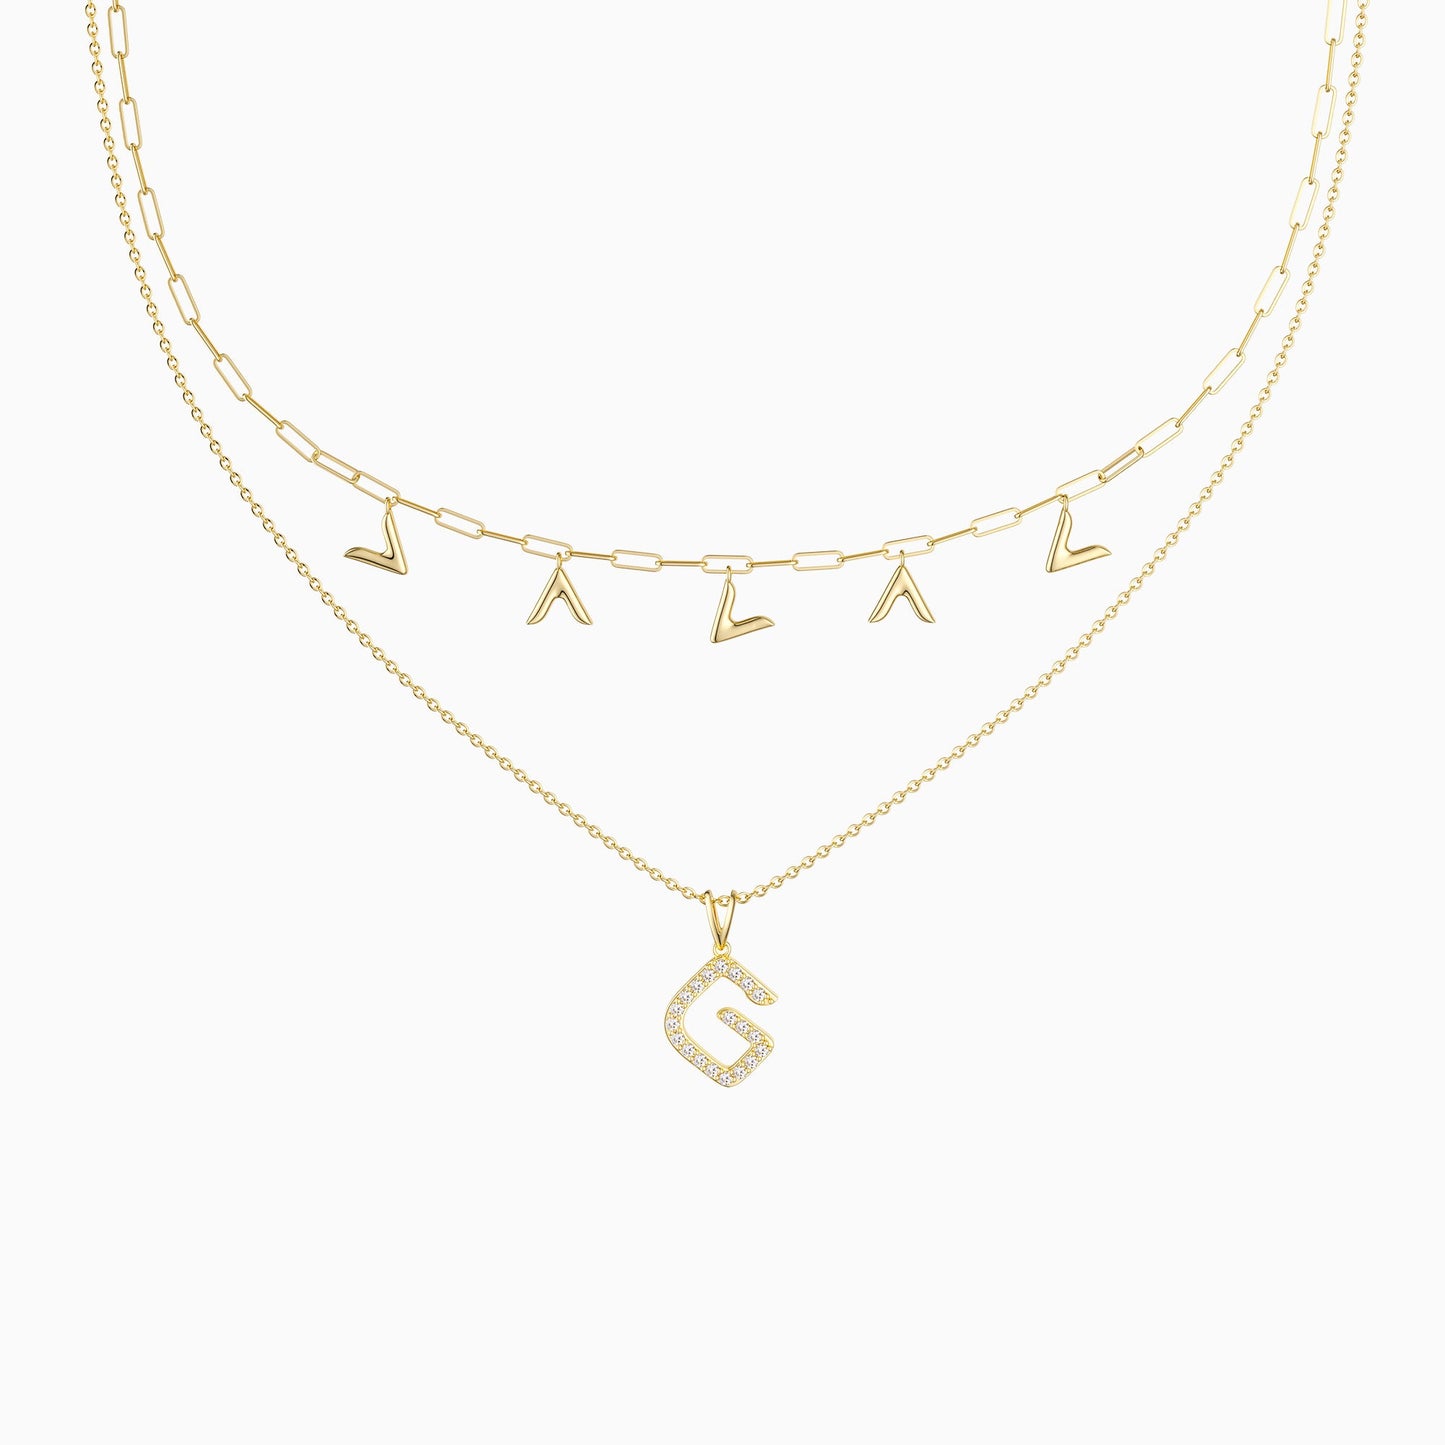 Layered Highs and Lows Necklace